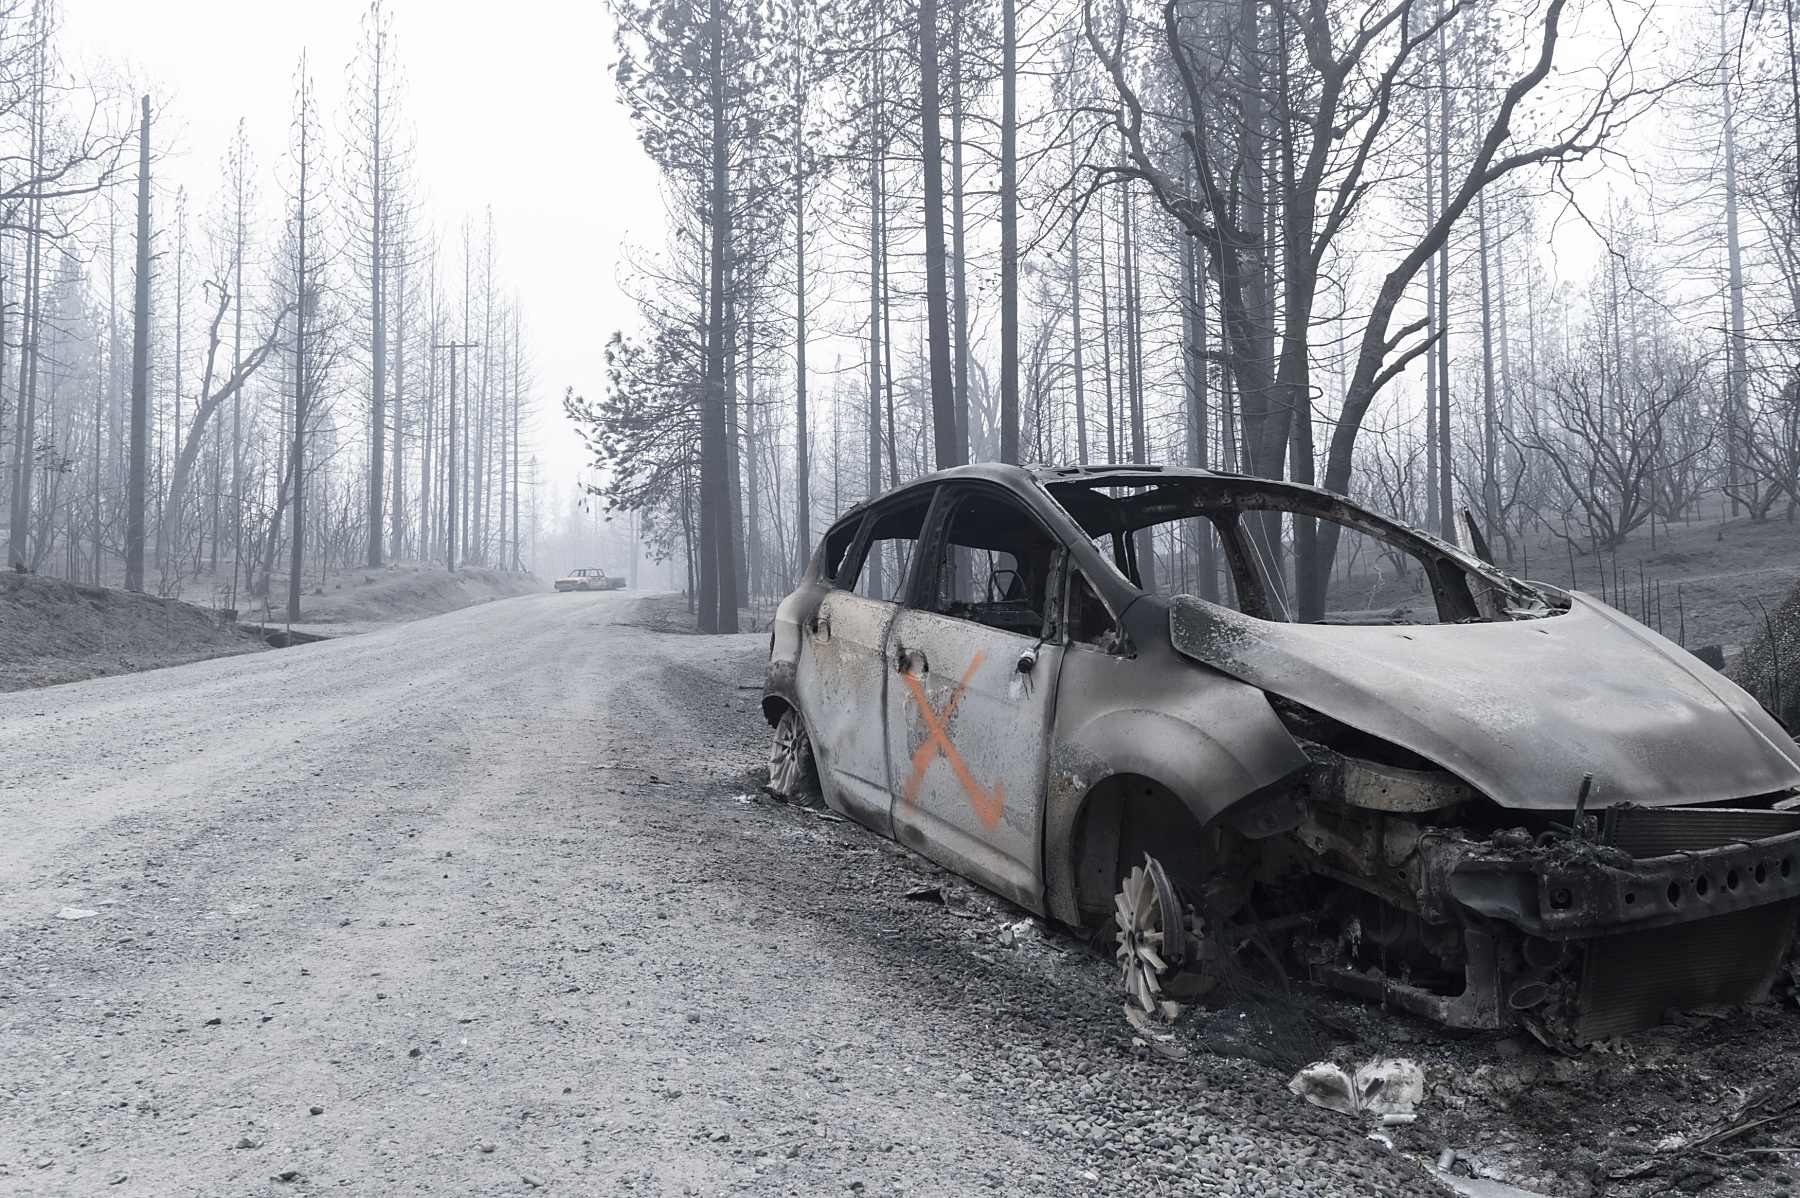 A fire-damaged car sits on the roadside in a bleak forest scene scarred by wildfires